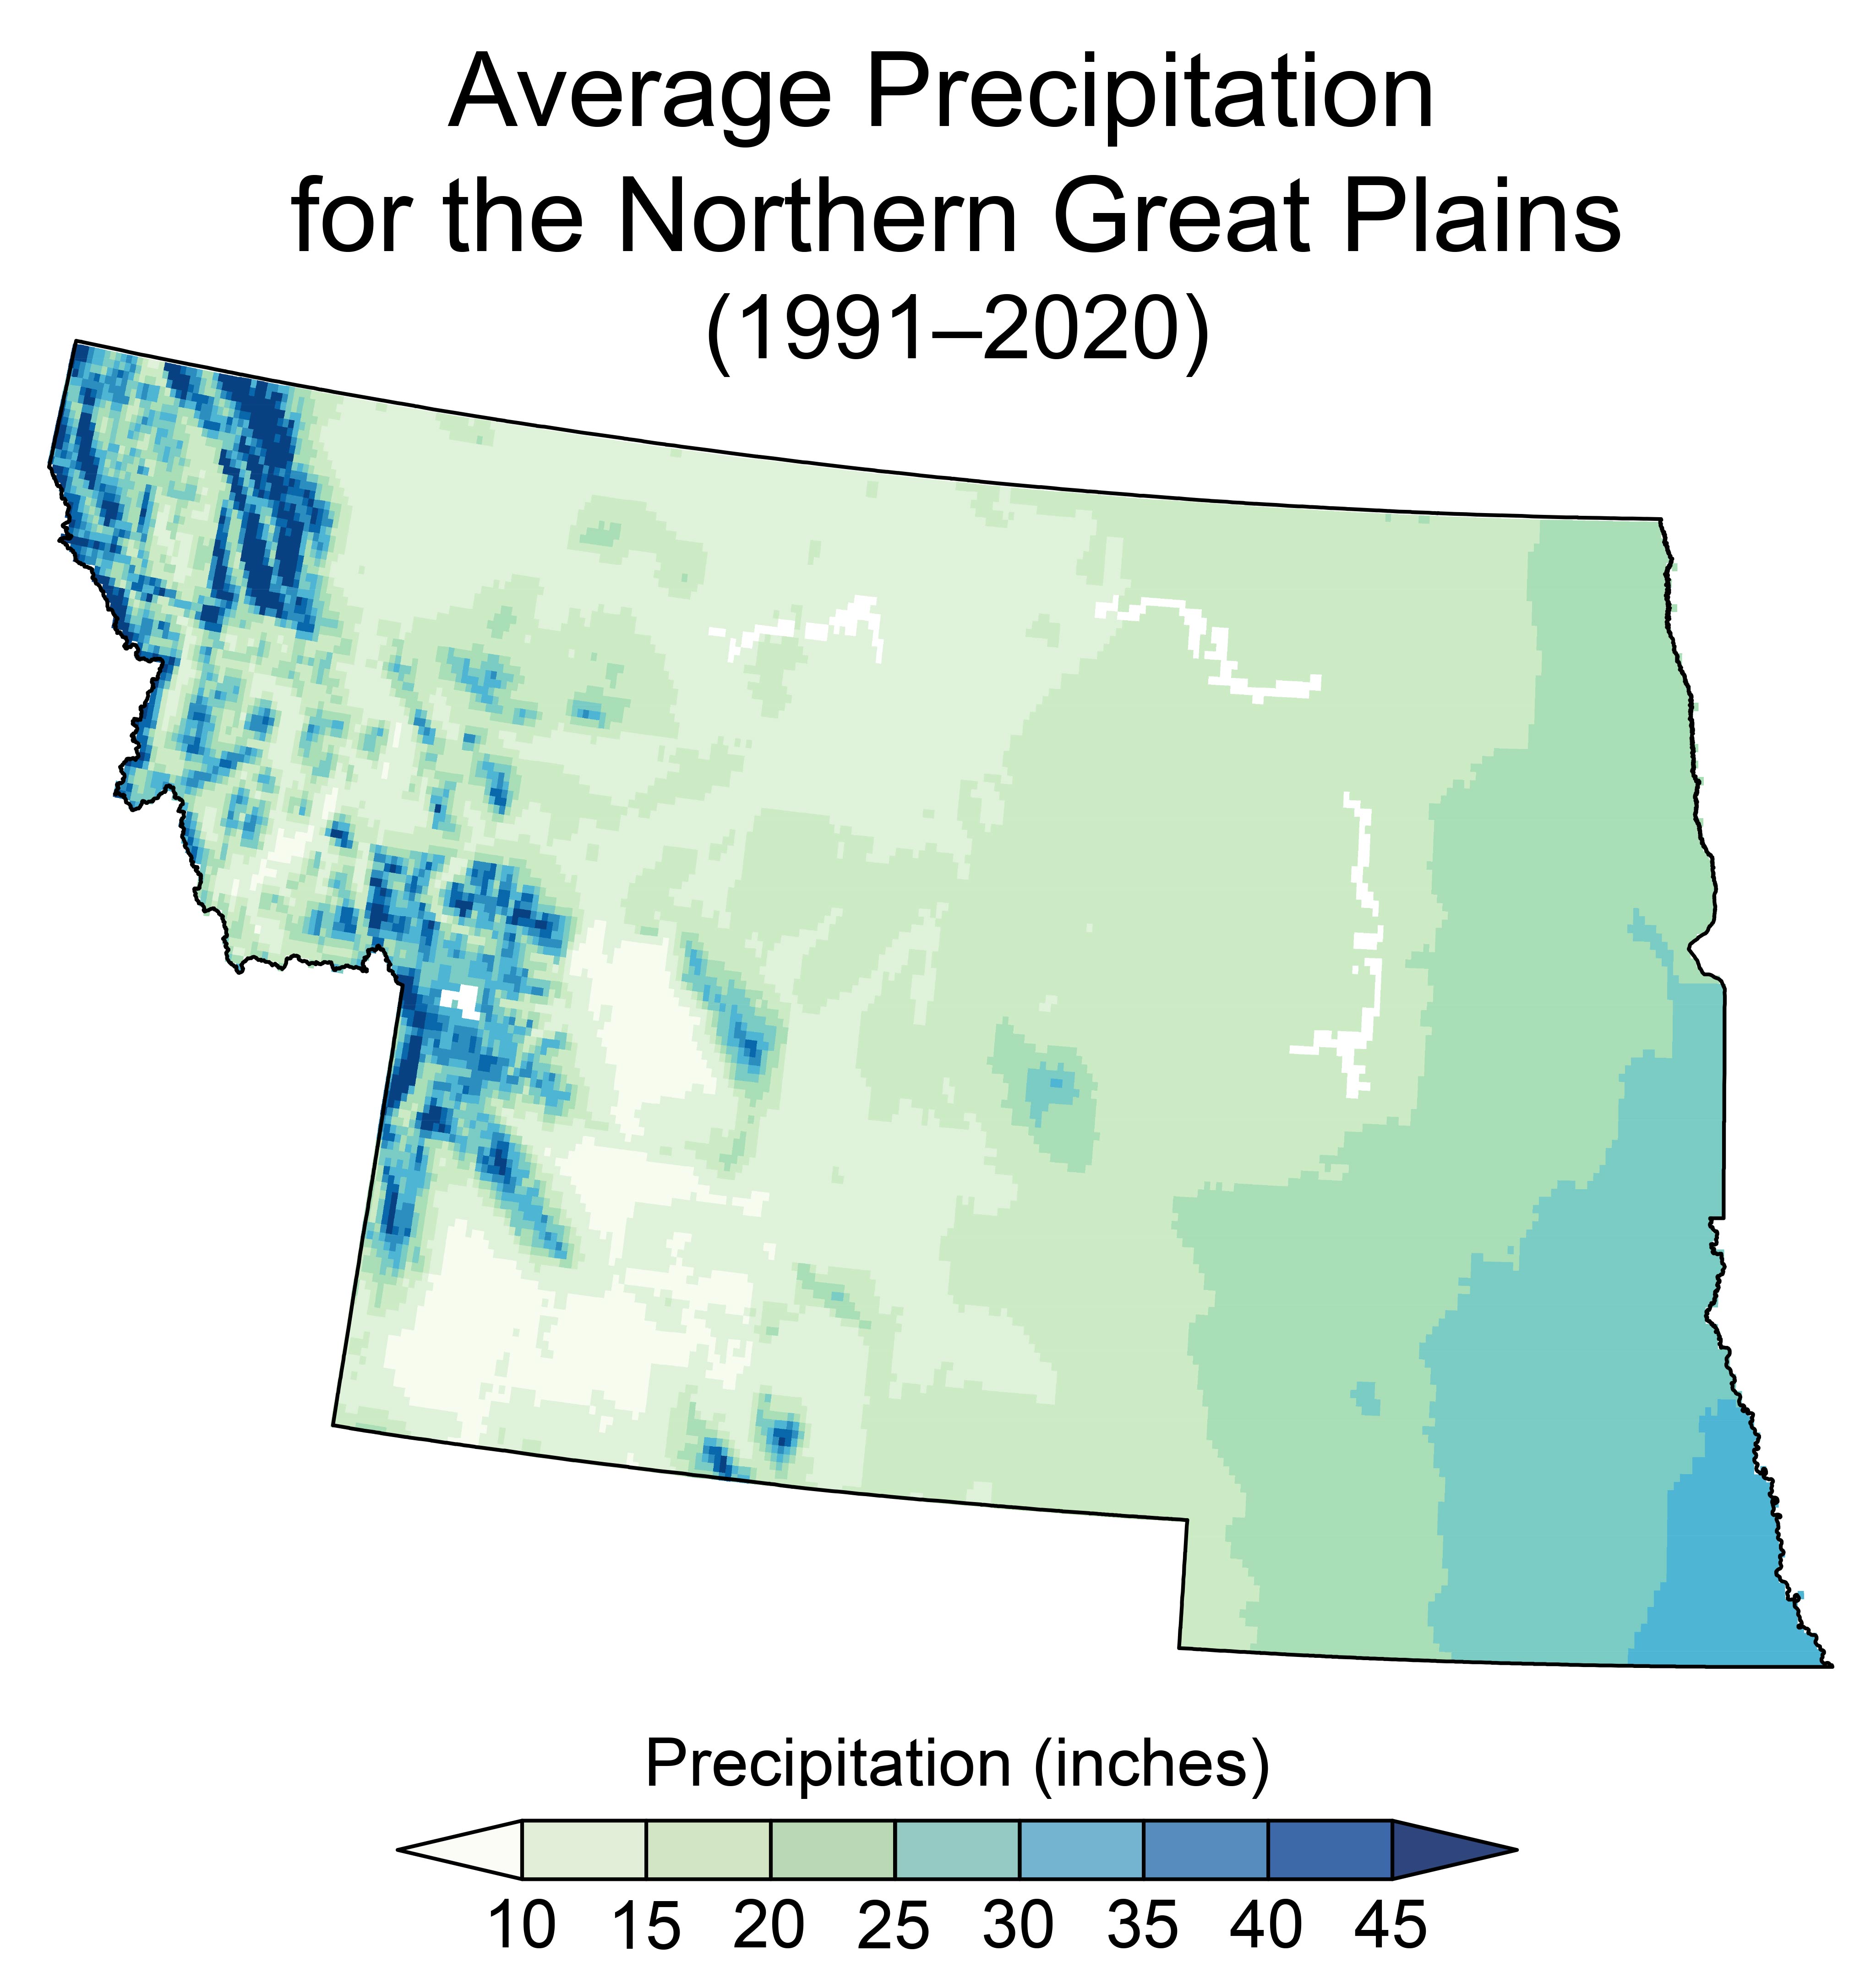 Annual Precipitation for the Northern Great Plains